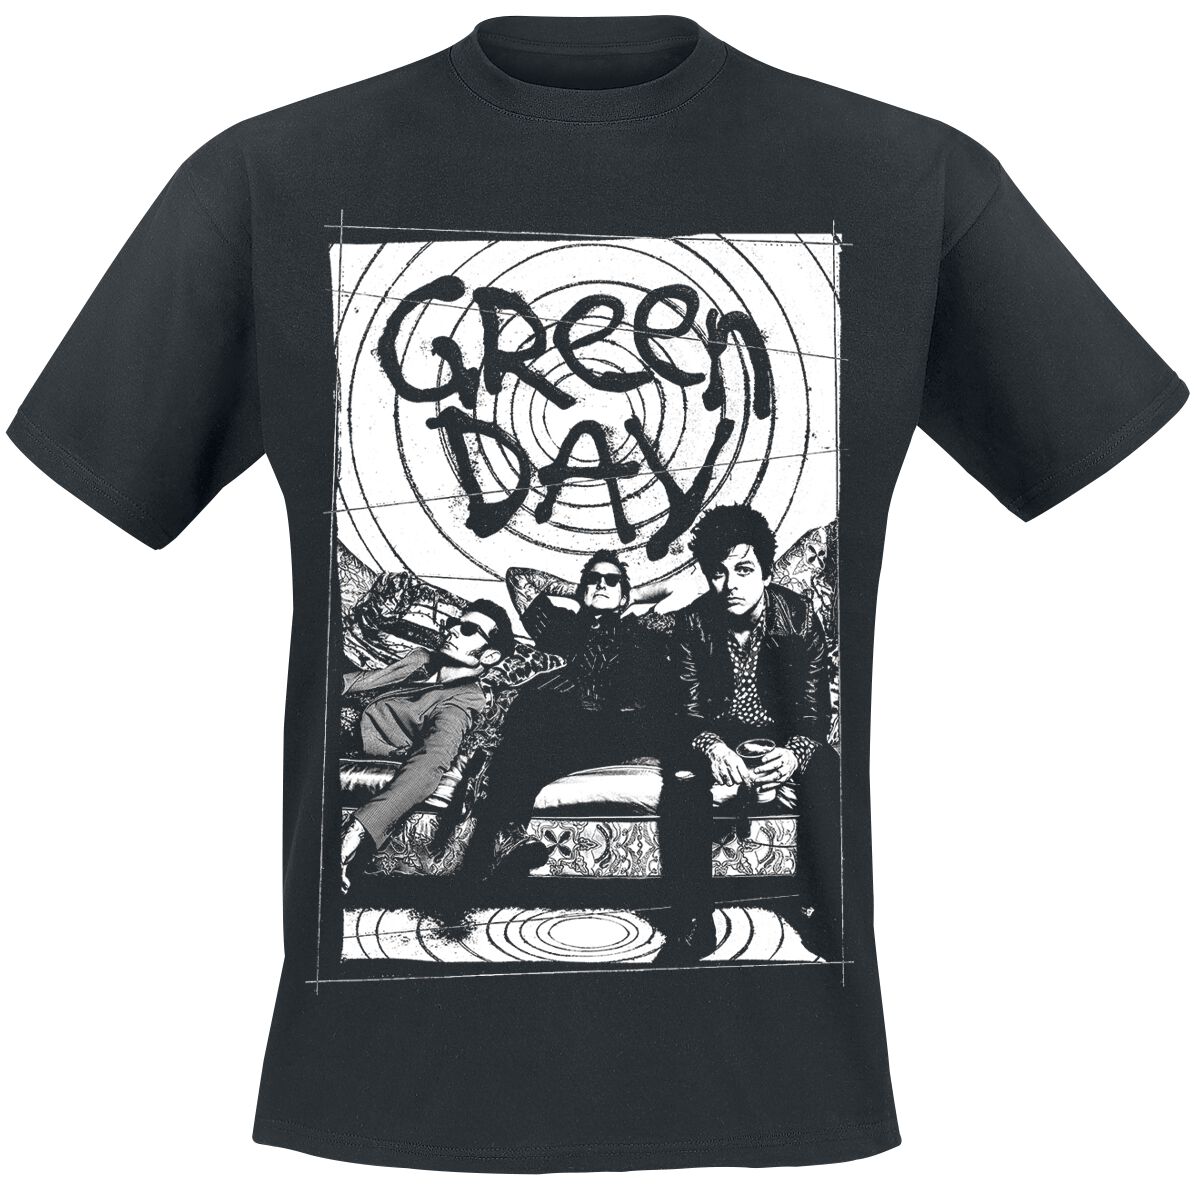 Image of Green Day Couch Photo T-Shirt schwarz